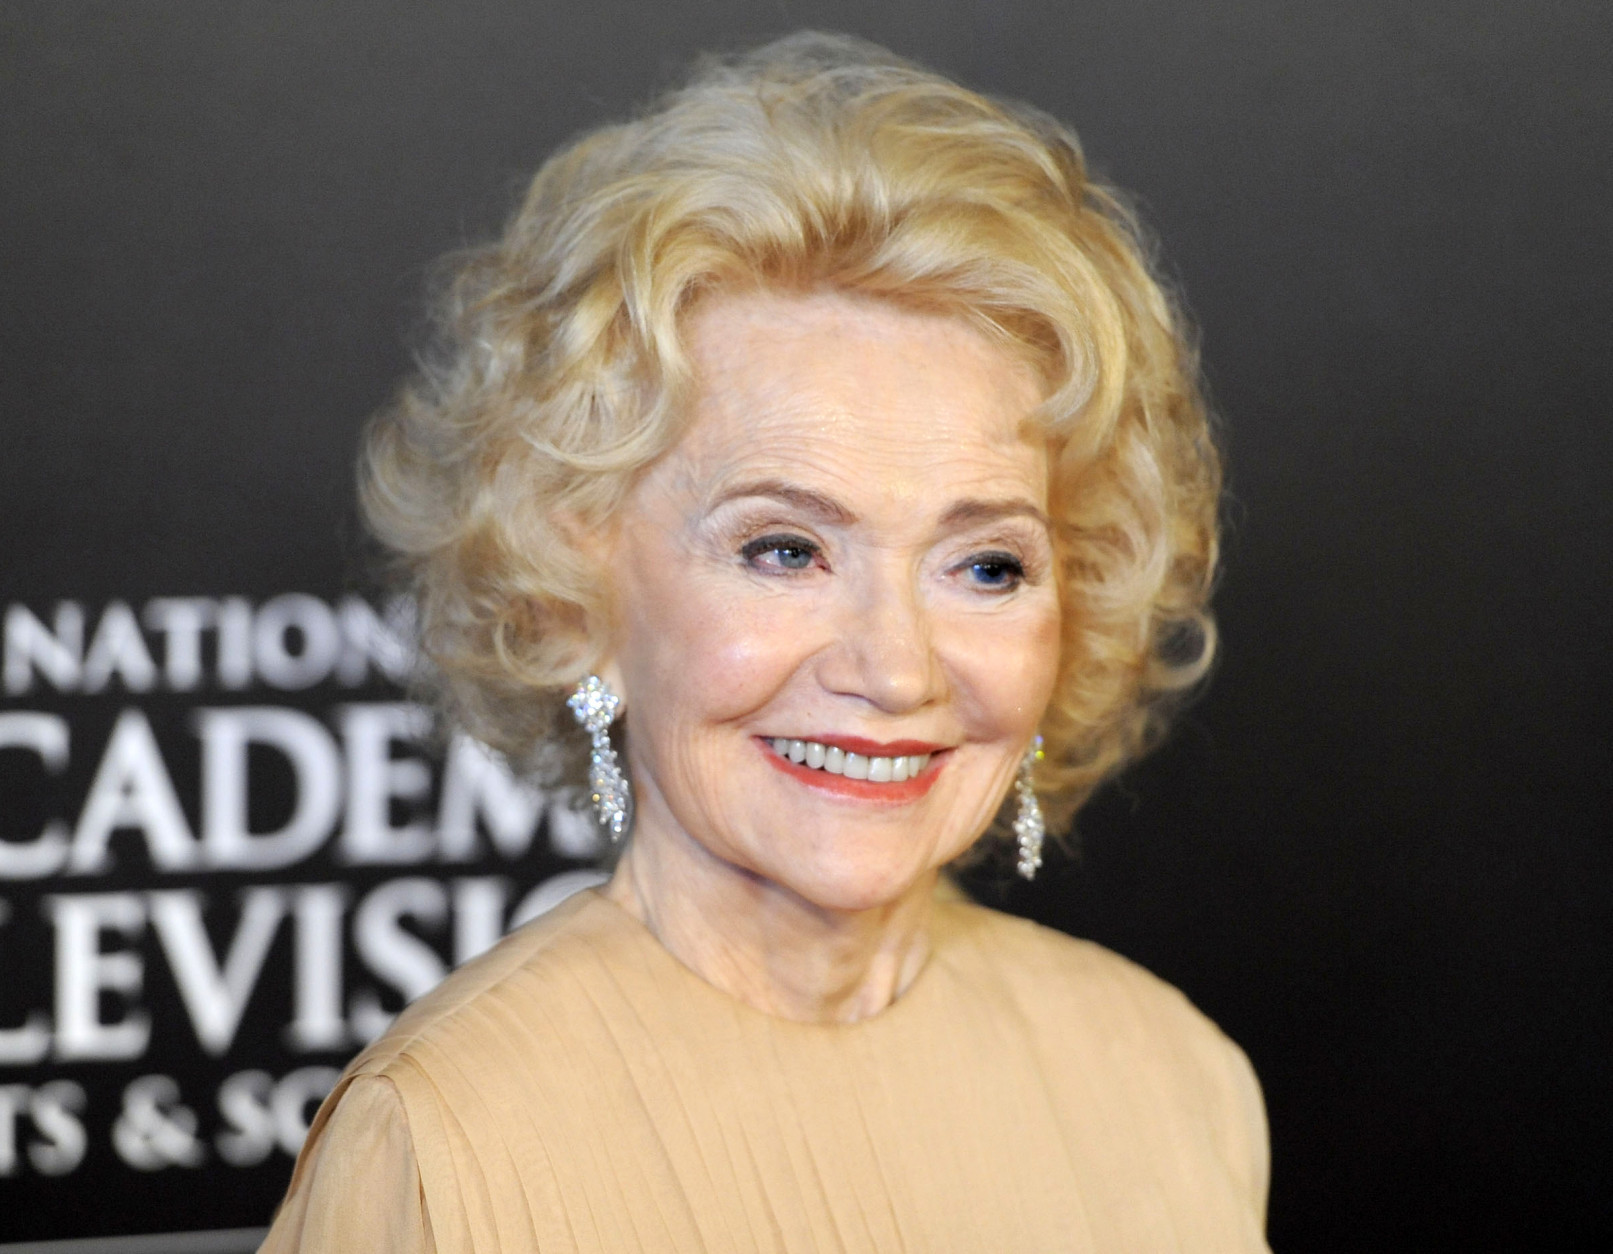 FILE - In this June 27, 2010 file photo, Agnes Nixon arrives at the 37th Annual Daytime Emmy Awards in Las Vegas. Nixon, the creative force behind the popular soap operas "One Life to Live" and "All My Children," died Wednesday, Sept. 28, 2016, in Haverford, Pa.  She was 93. (AP Photo/Chris Pizzello, File)